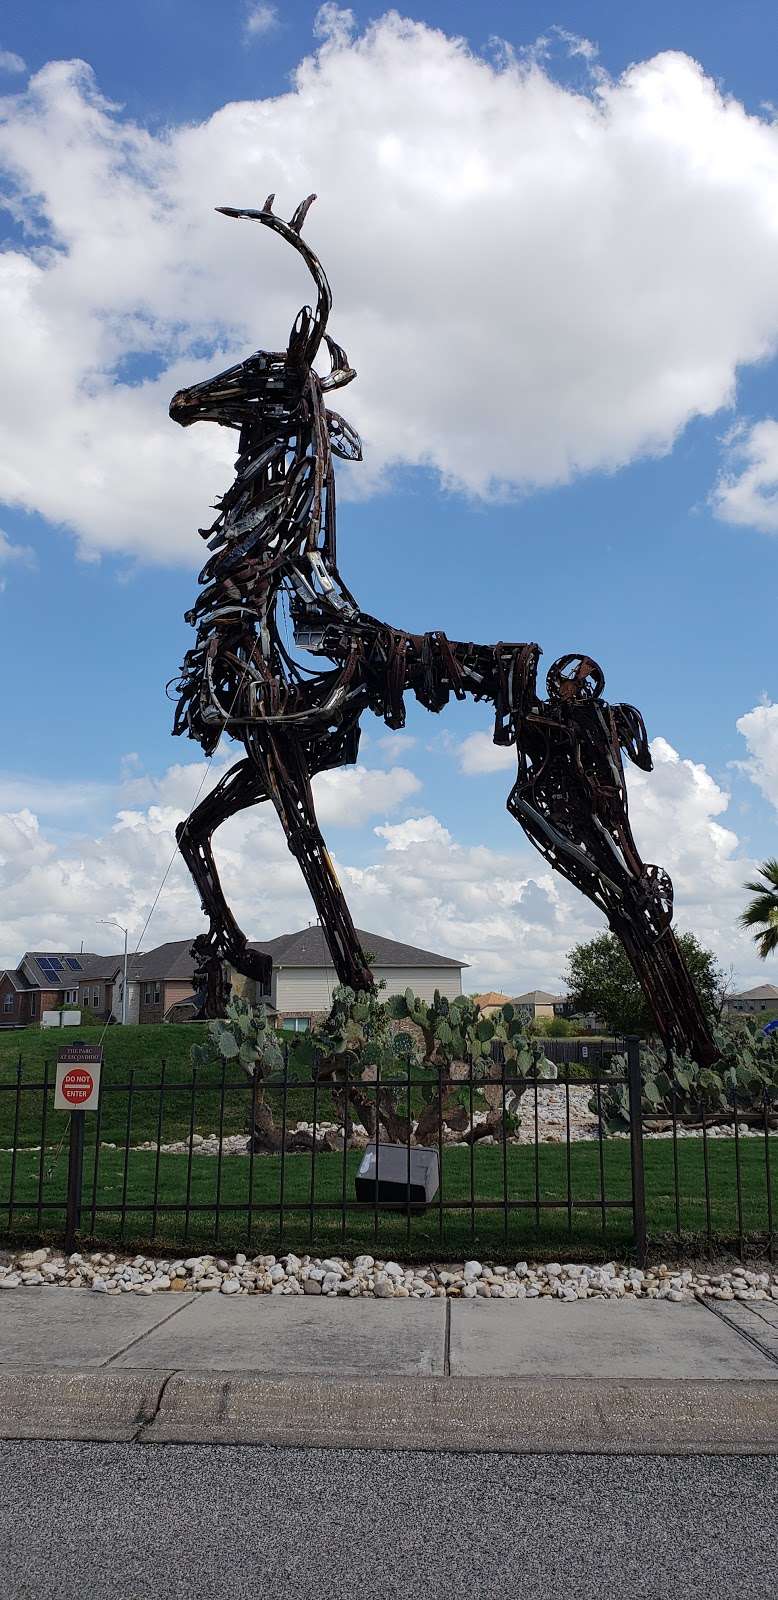 Giant Stag Statue | 05089-000-1000, Converse, TX 78109, USA